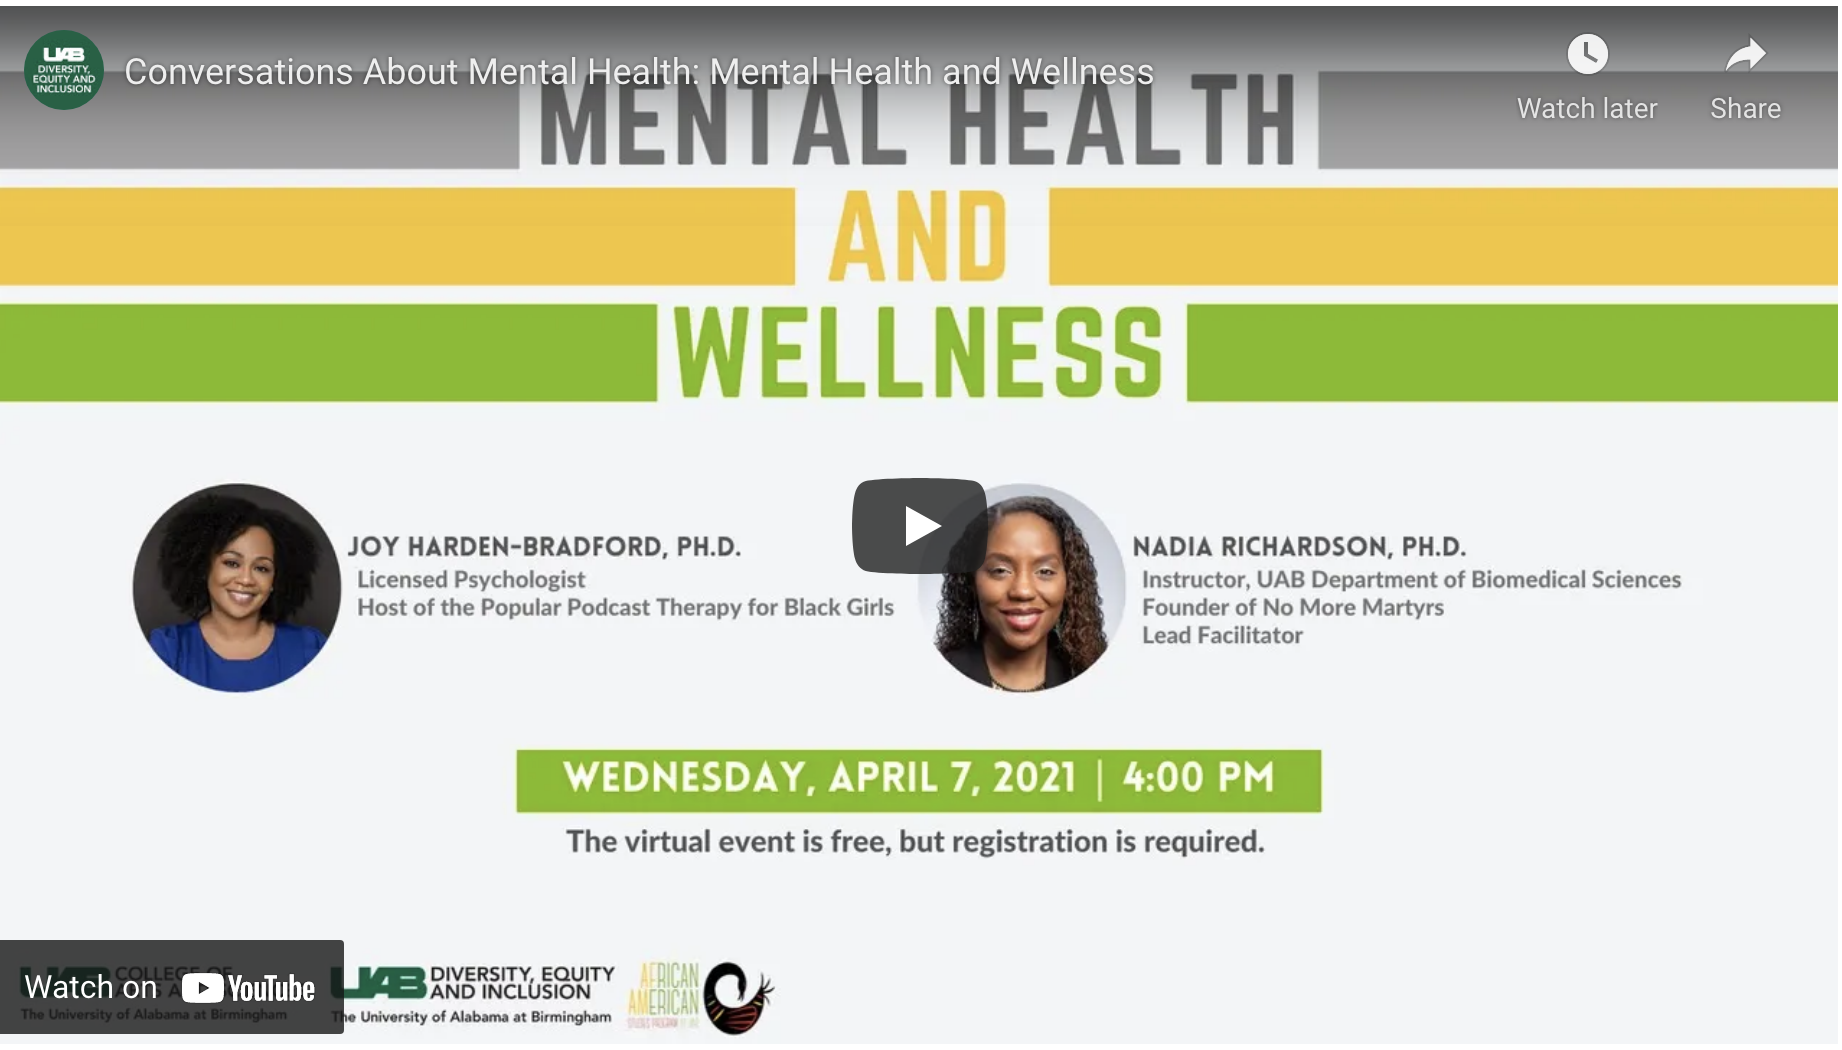 Conversations about Mental Health: Mental Health and Wellness